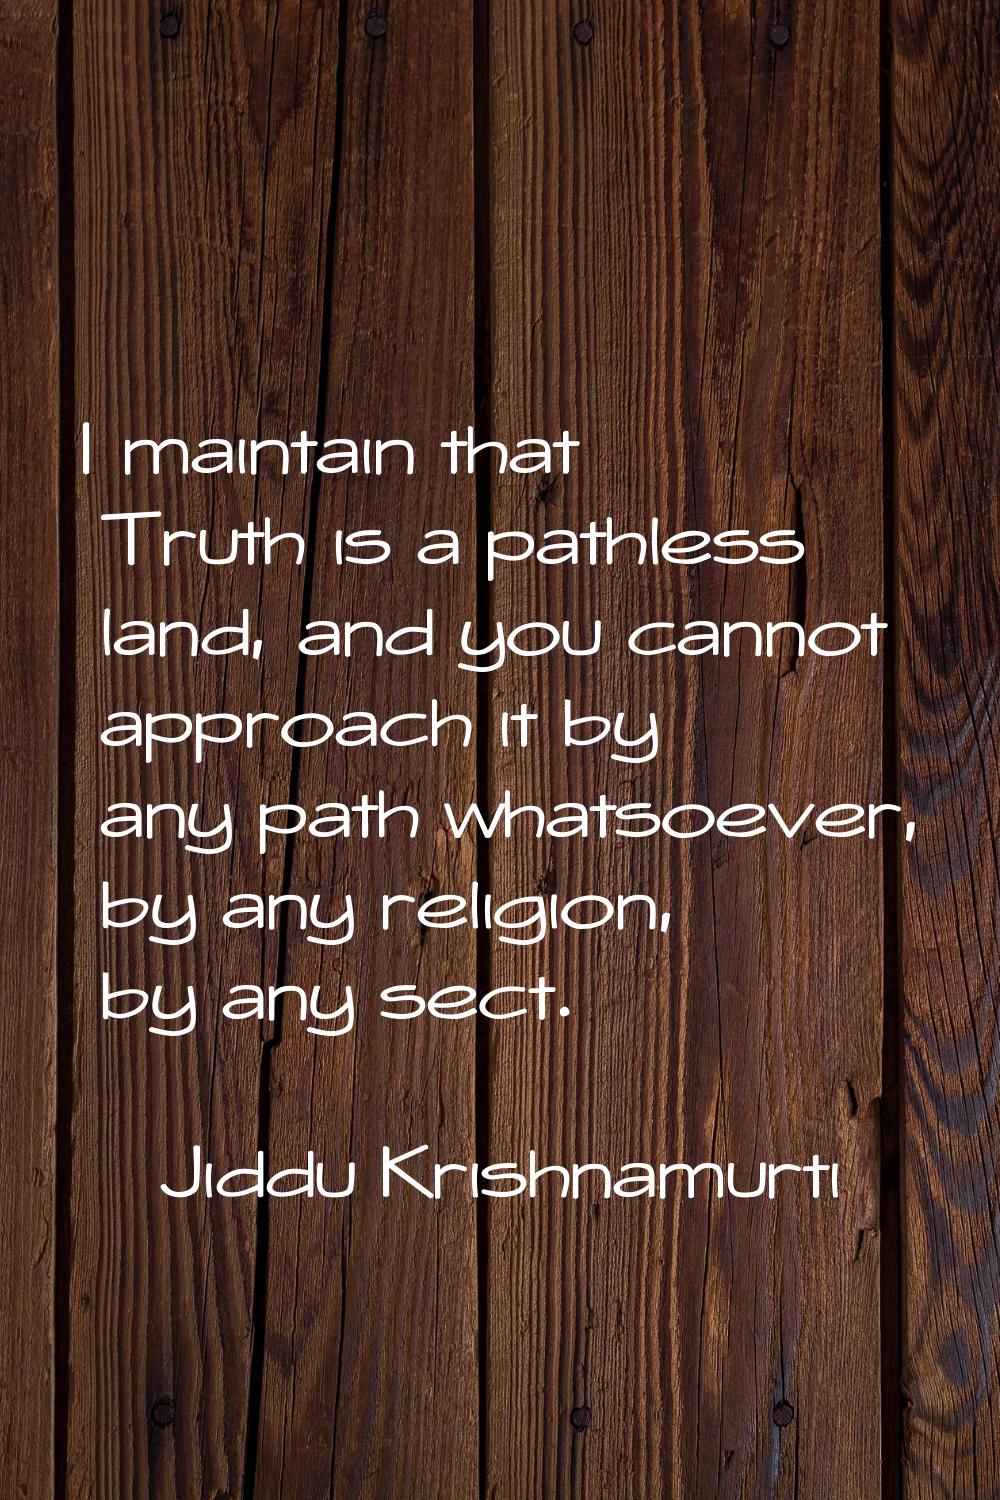 I maintain that Truth is a pathless land, and you cannot approach it by any path whatsoever, by any